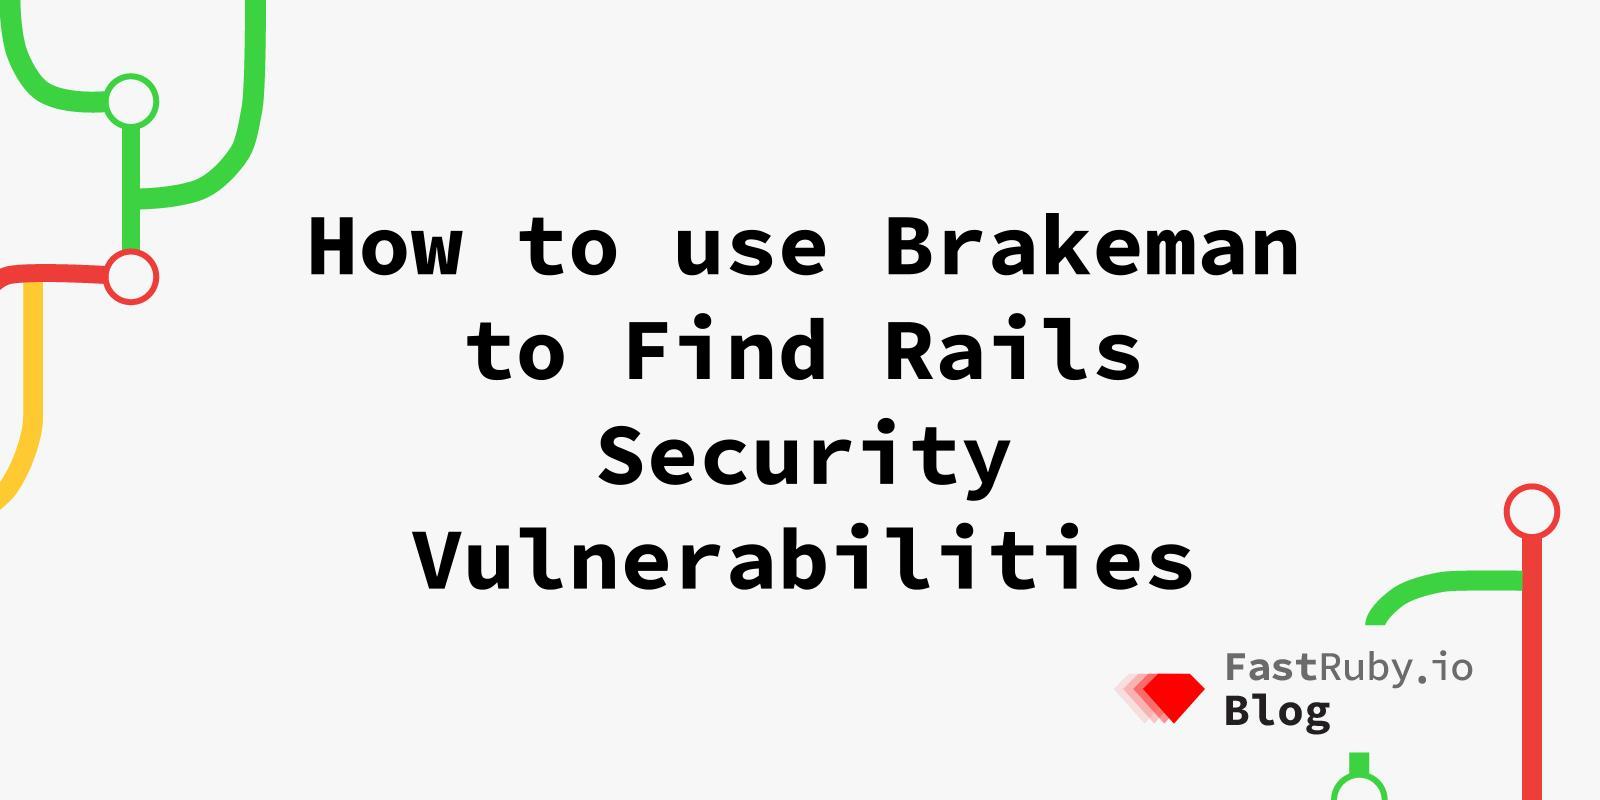 How to use Brakeman to find Rails security vulnerabilities